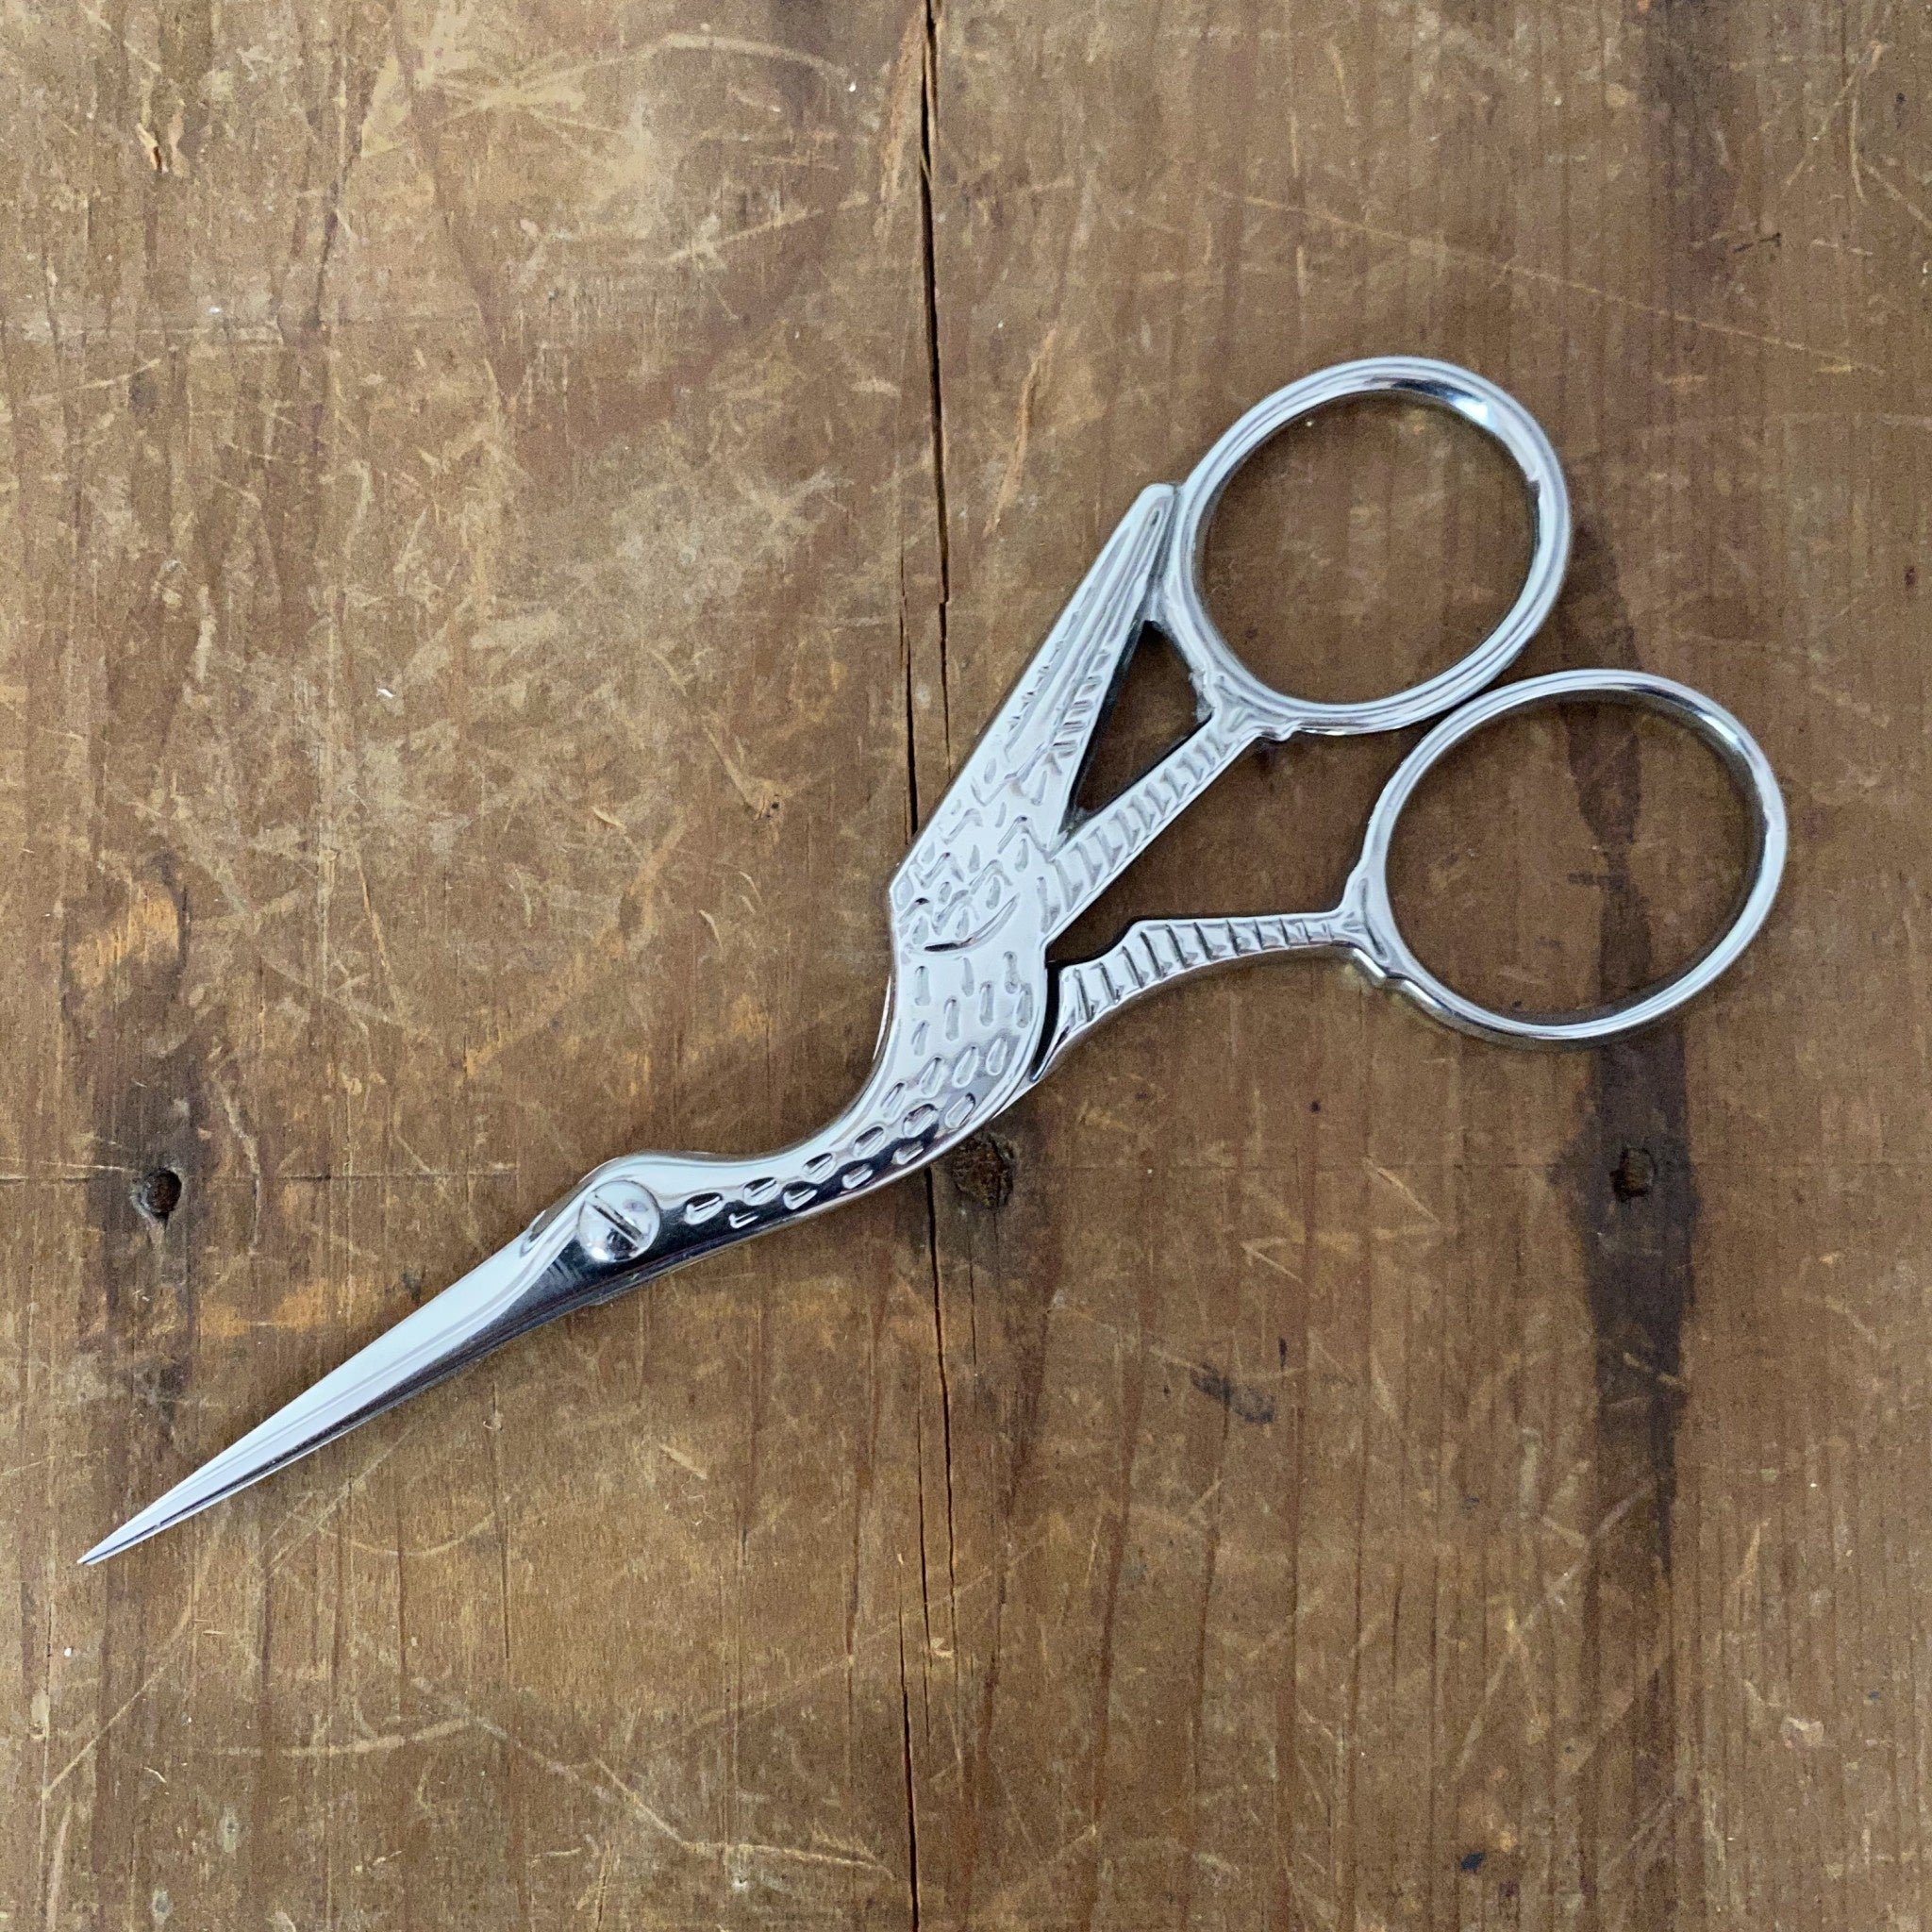 Stainless Steel Embroidery Stork Scissors